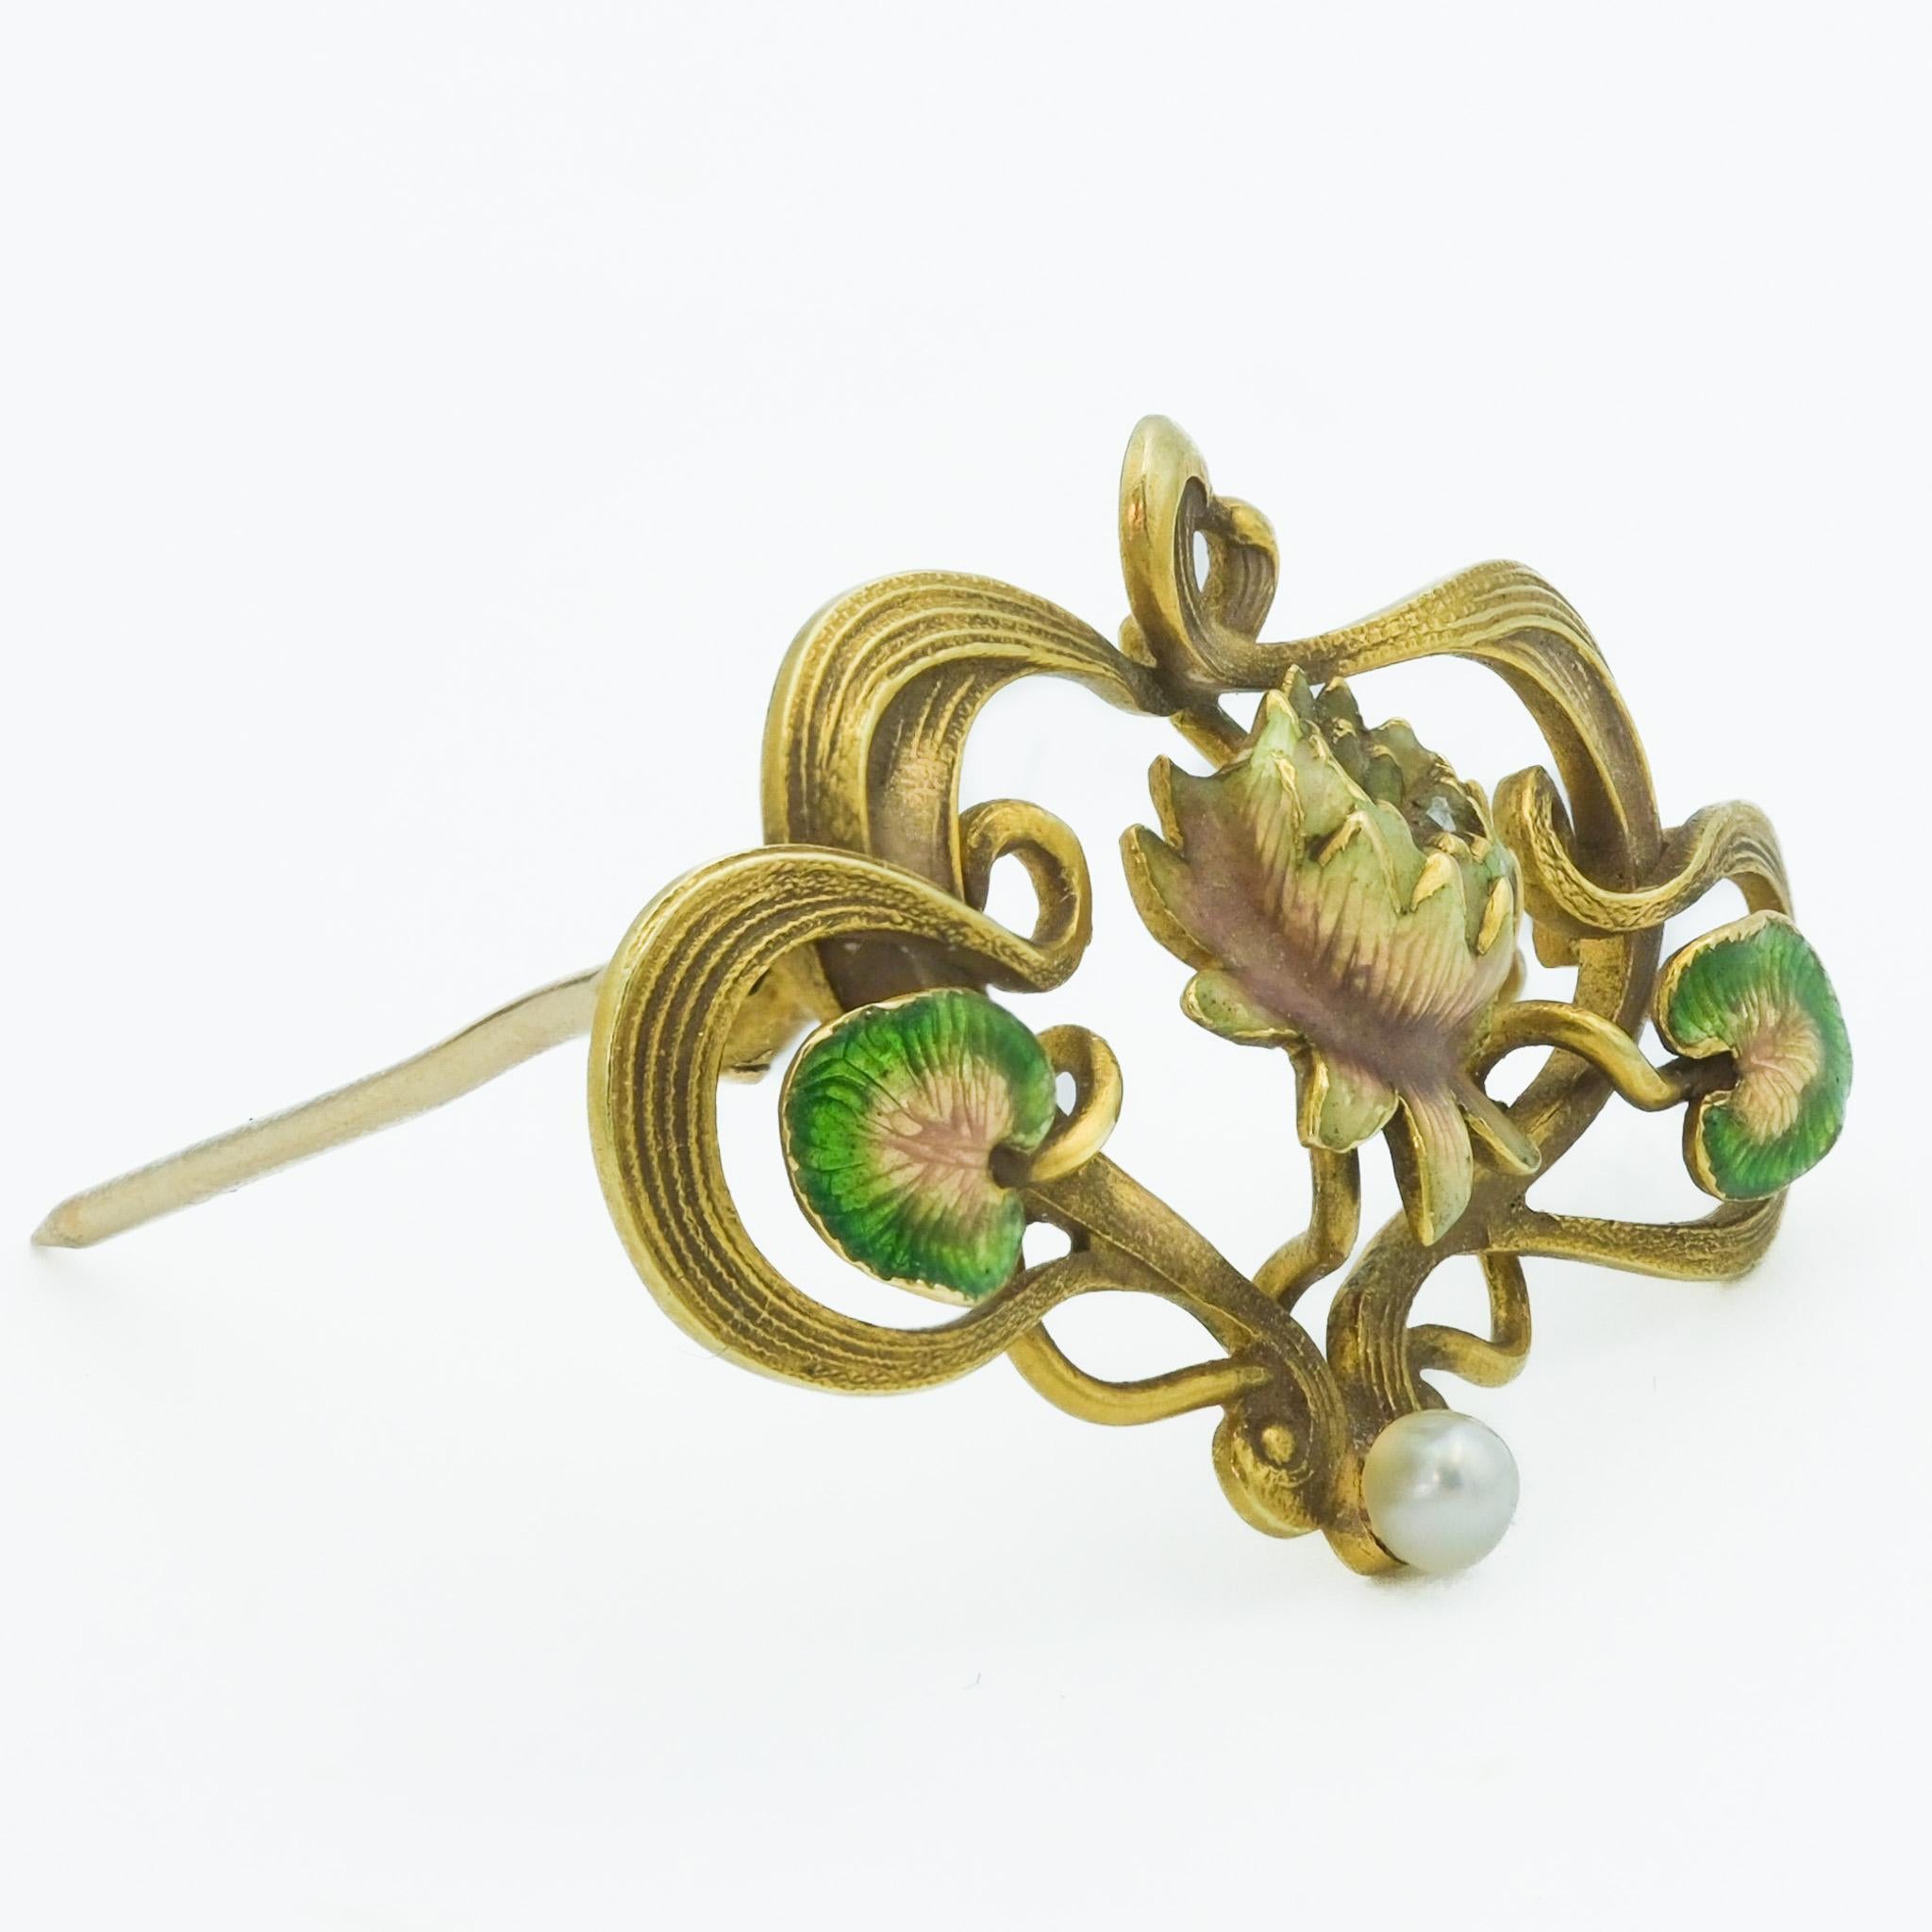 This 10 karat yellow gold brooch pin from the Art Nouveau era, features a stylized floral design that is characteristic of the period - spanned roughly from 1890 to 1910. Art Nouveau was a reaction against the academic art, industrialization, and